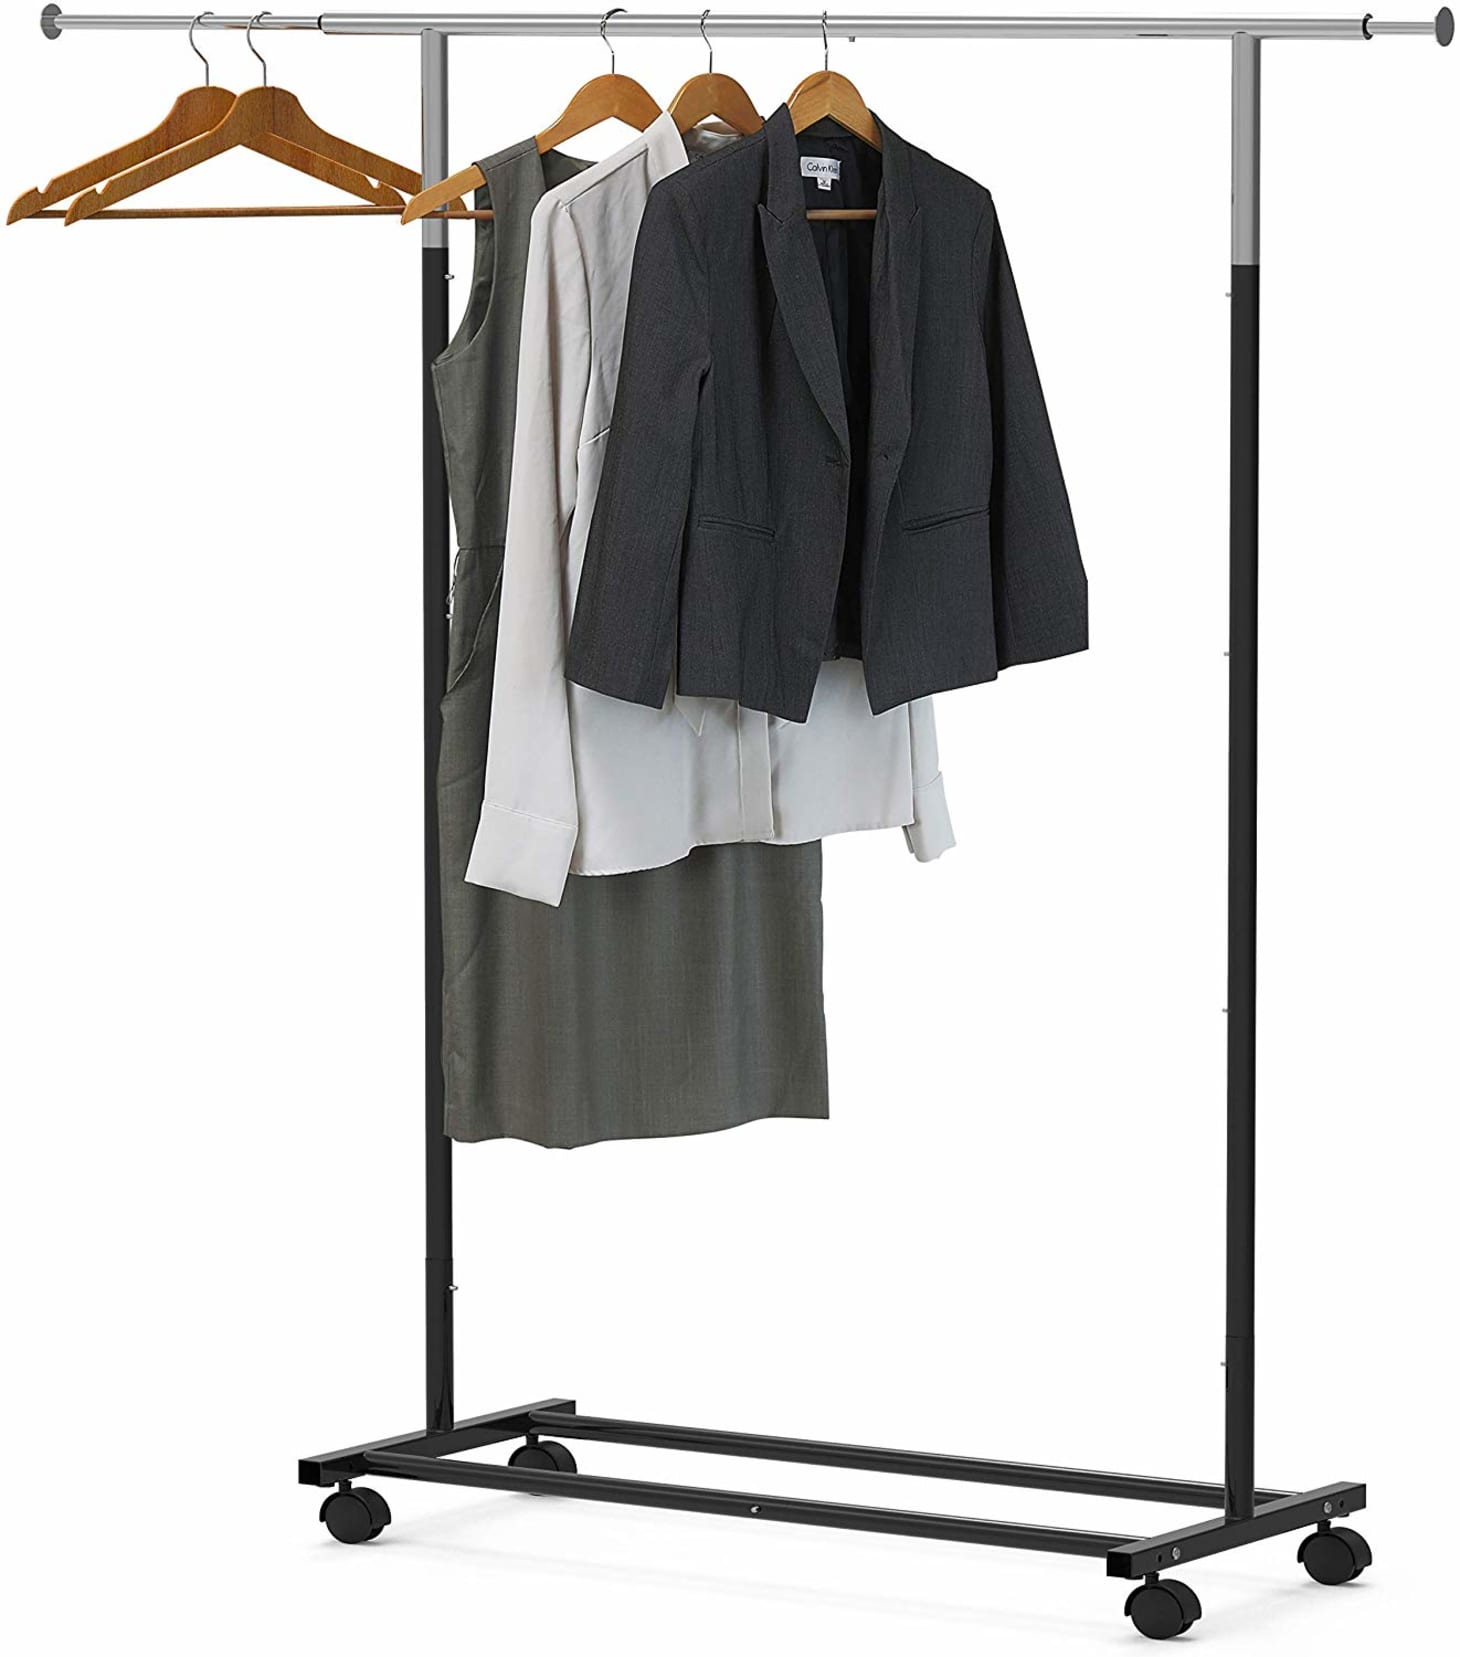 The Best Freestanding Wardrobe & Clothes Racks | Apartment Therapy